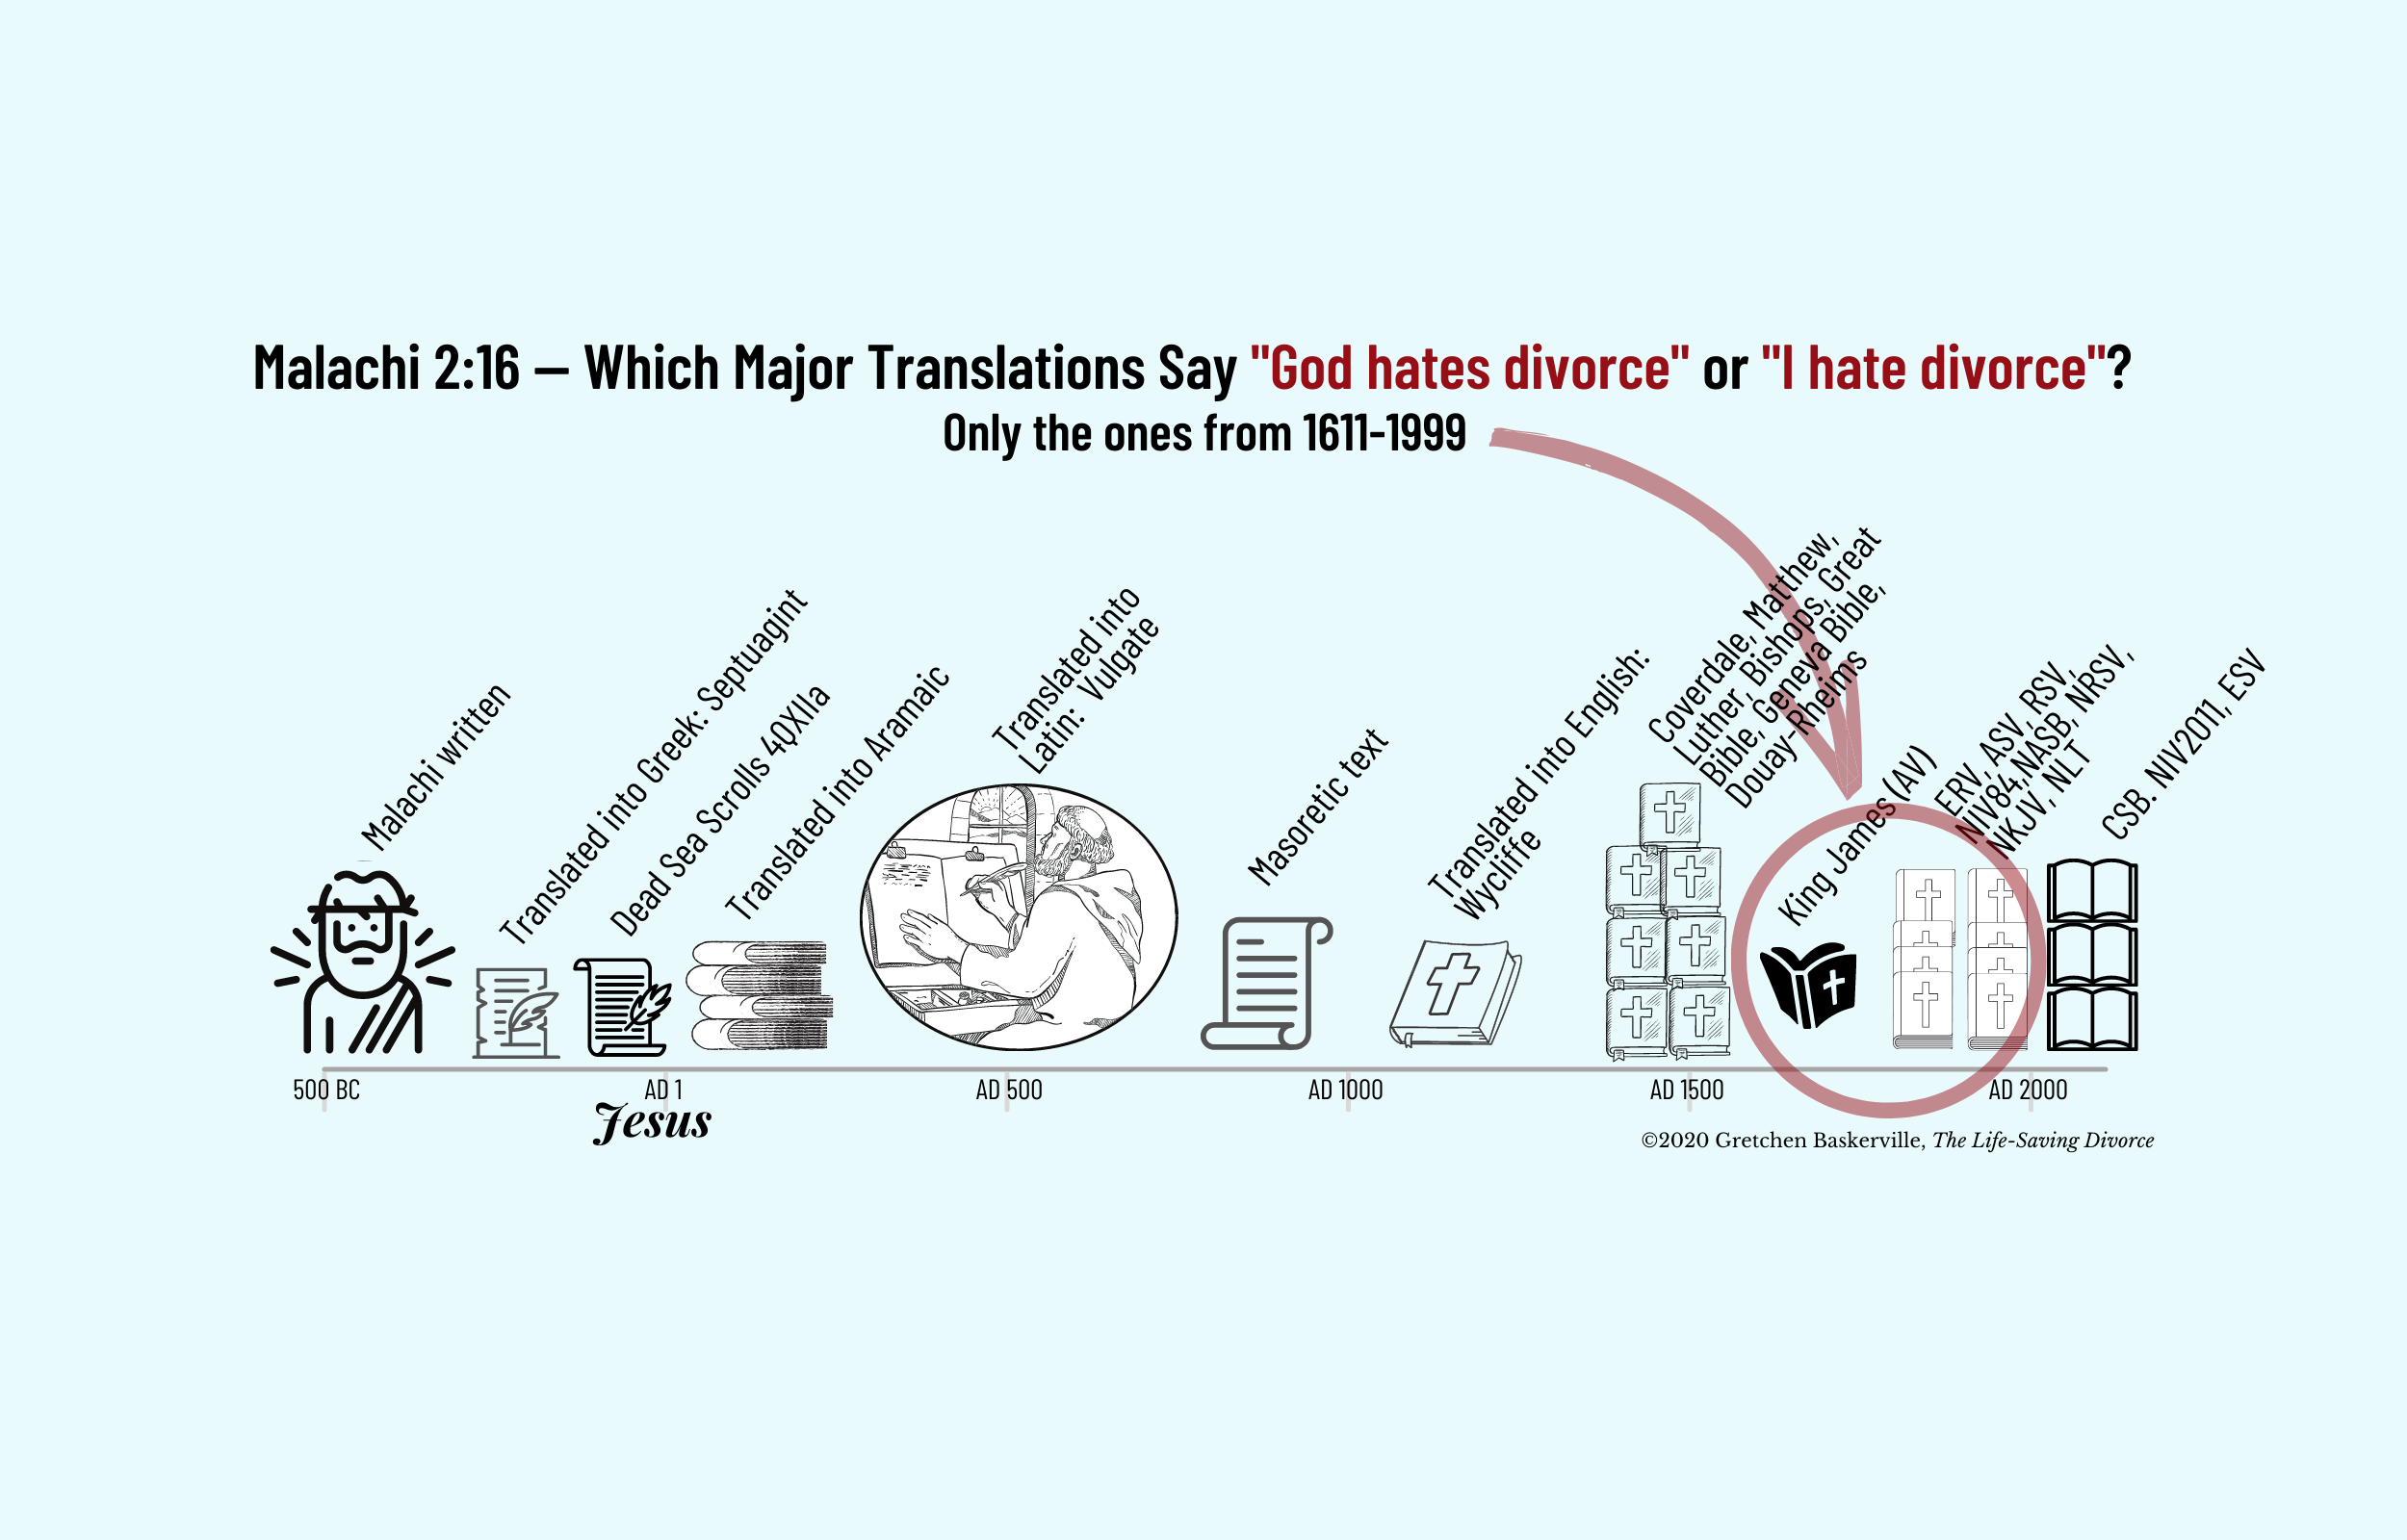 This infographic shows that from writing of the Book of Malachi, in about 500 BC, to AD 1600, no major Bible translation interpreted Malachi 2:16 as "God hates divorce" or "I have divorce." 